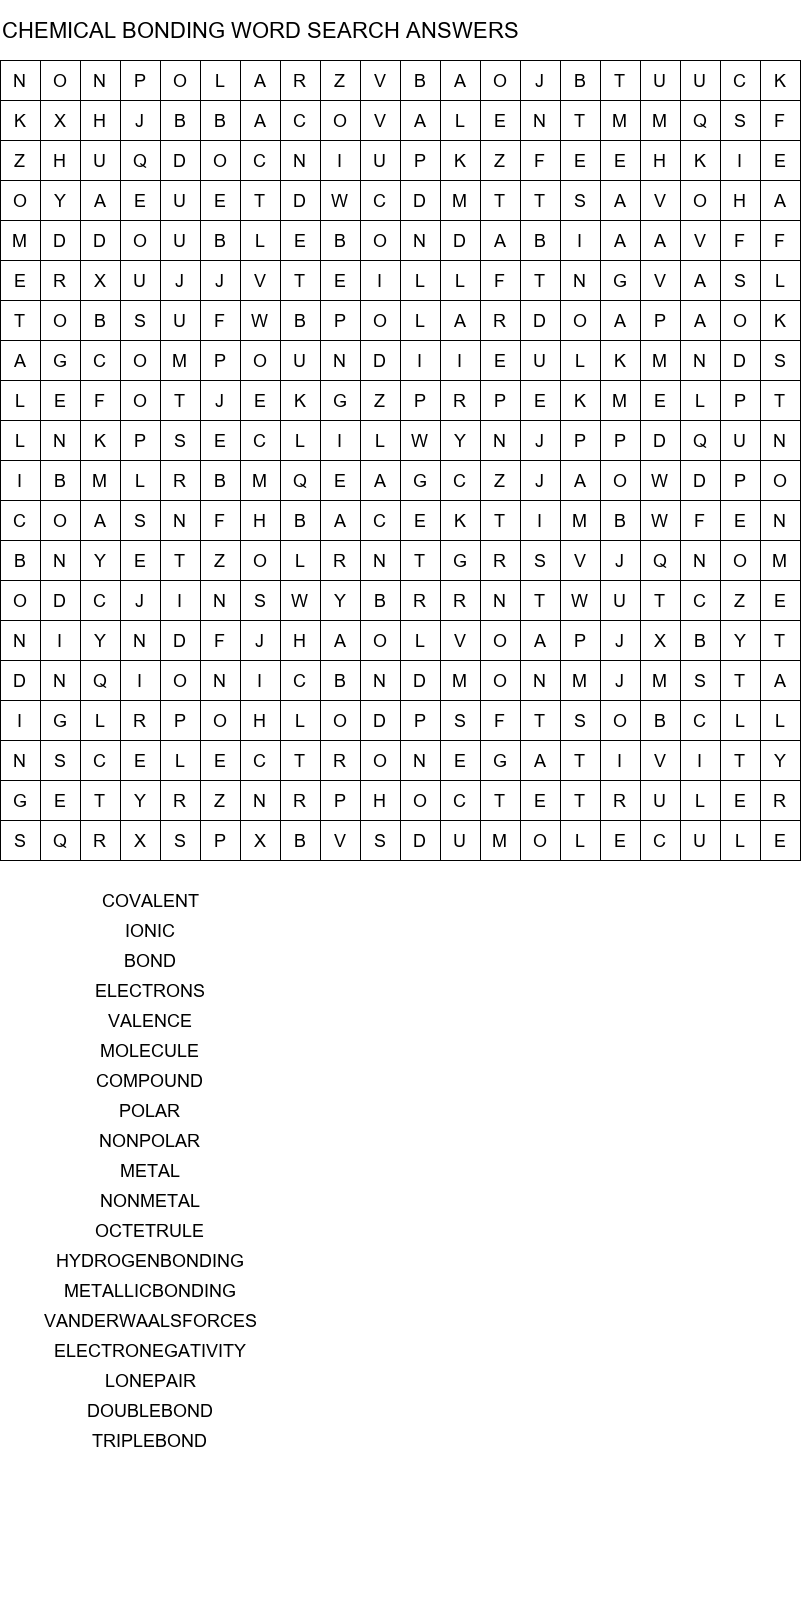 chemical bonding word search answers size 20x20